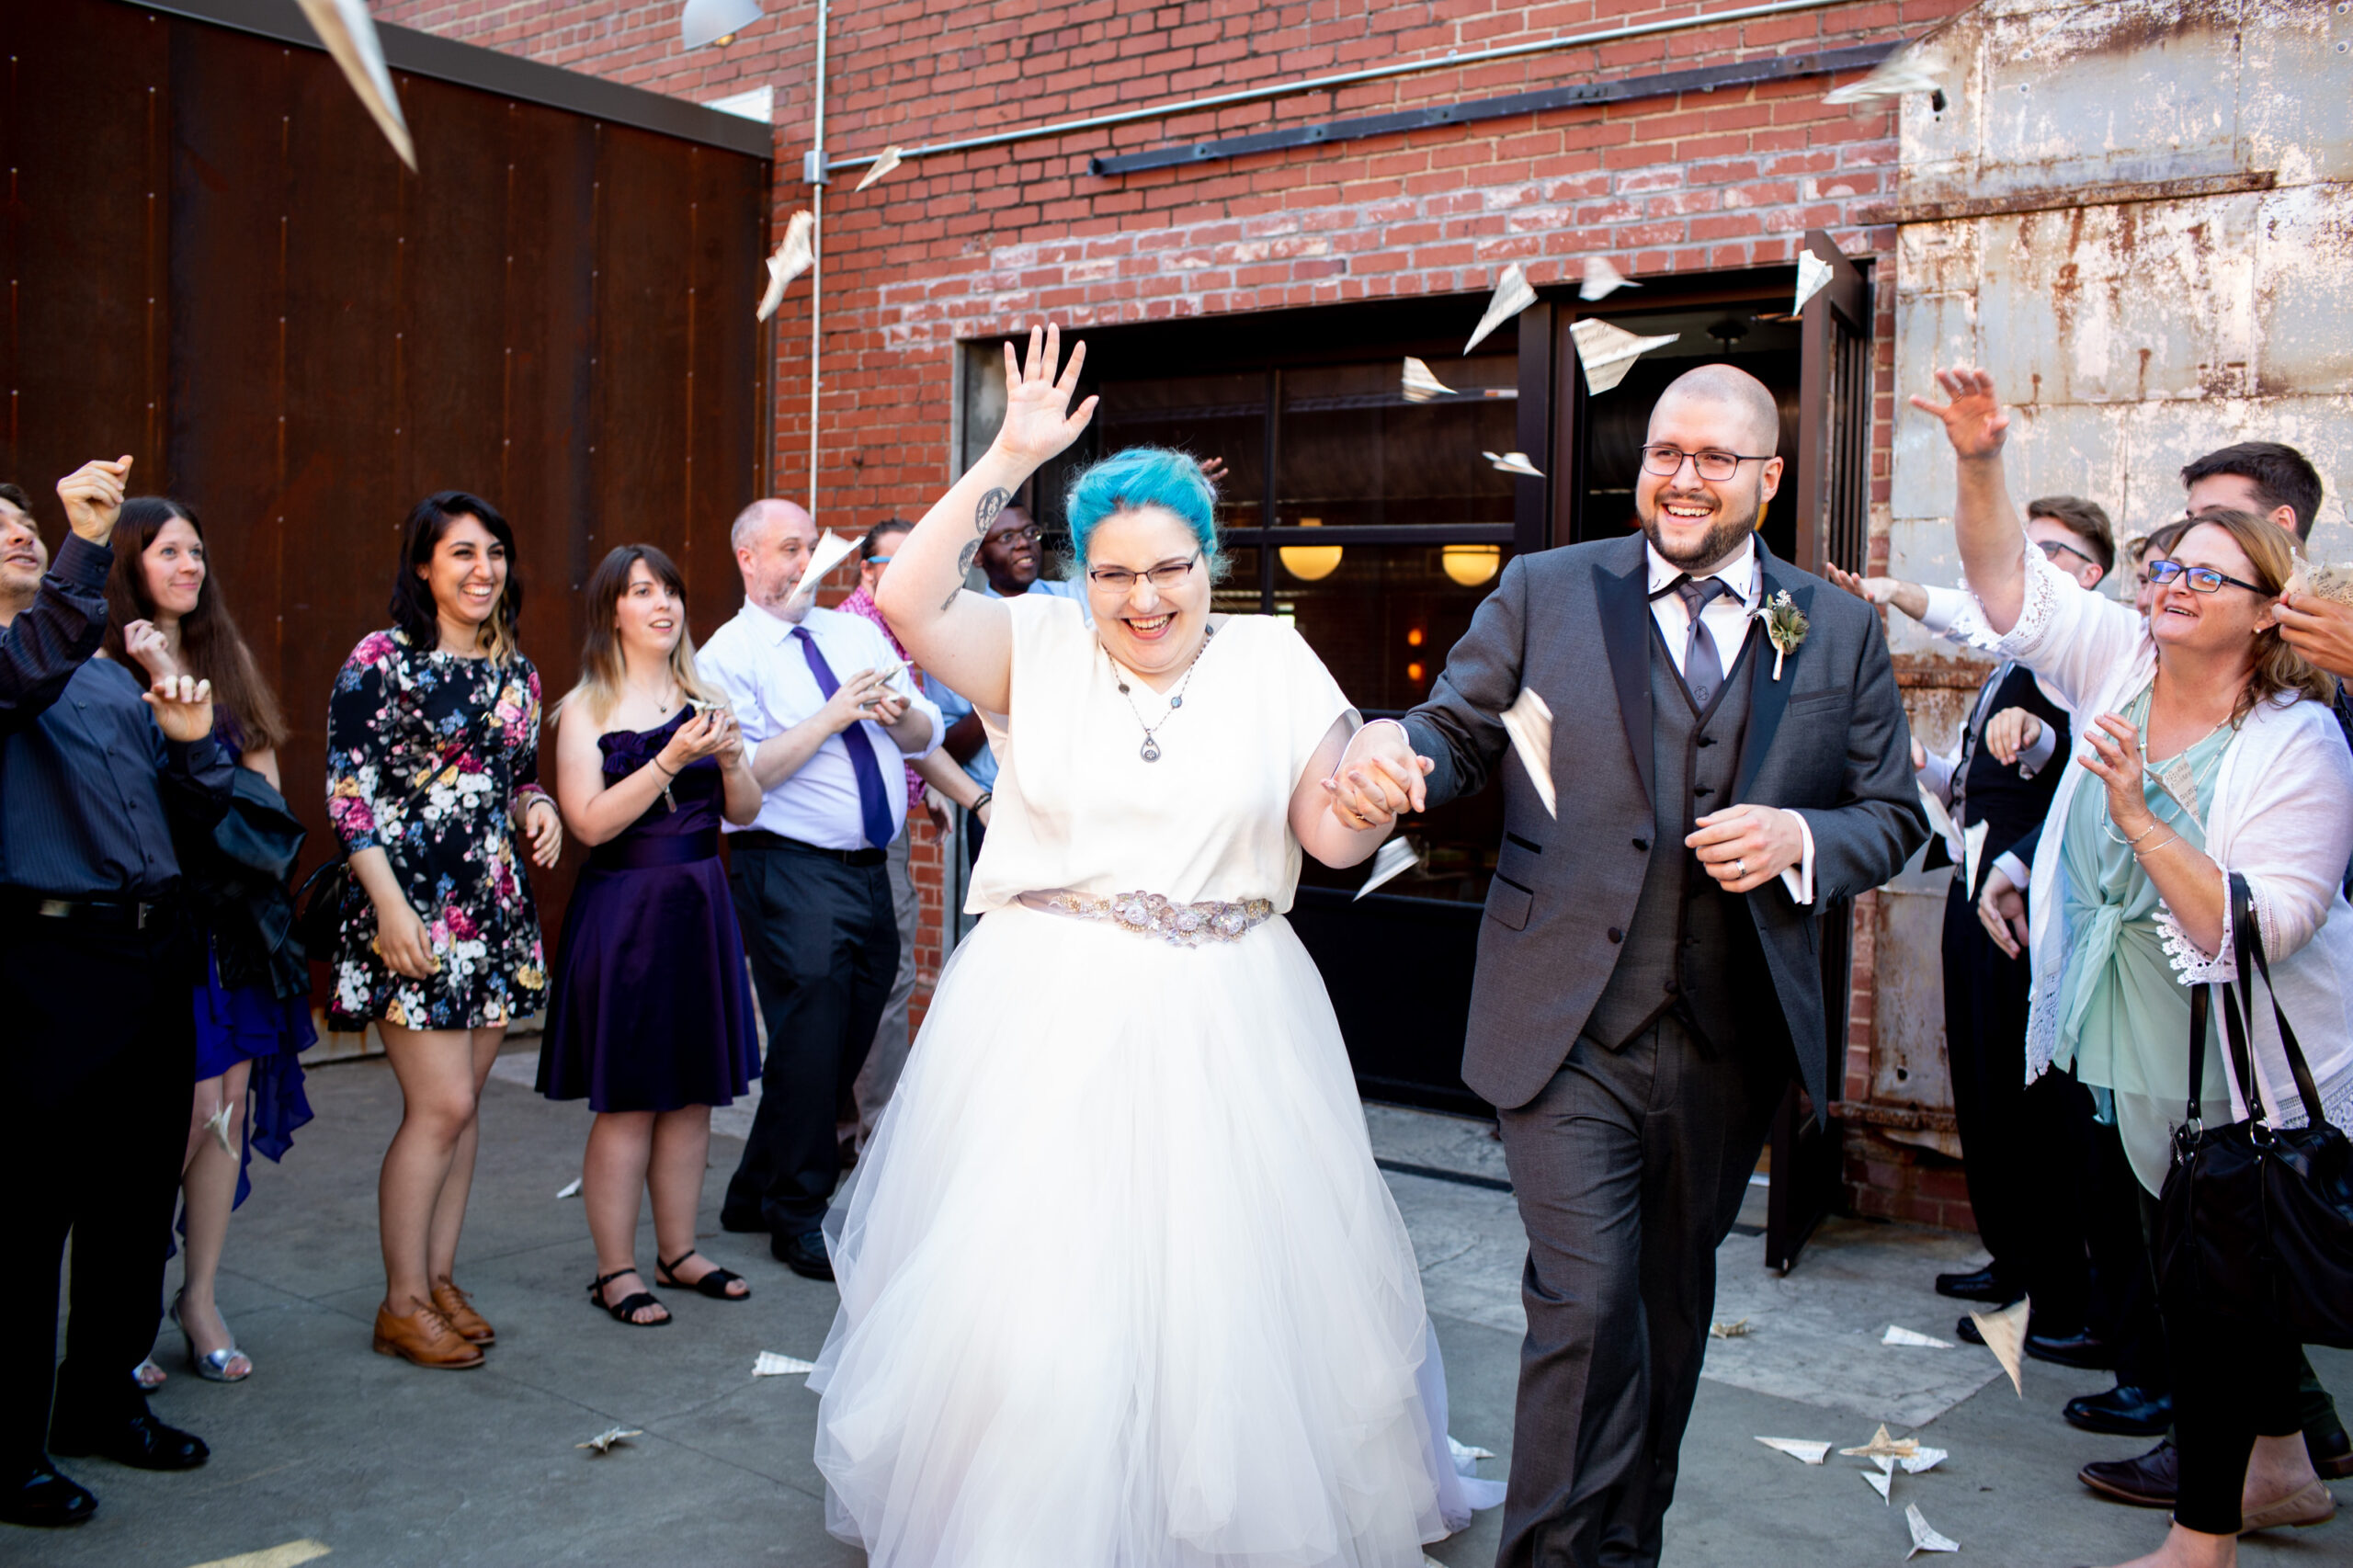 A bride with electric blue hair and a groom in a dark suit walk toward us arm in arm, as guests throw paper airplanes around them. 